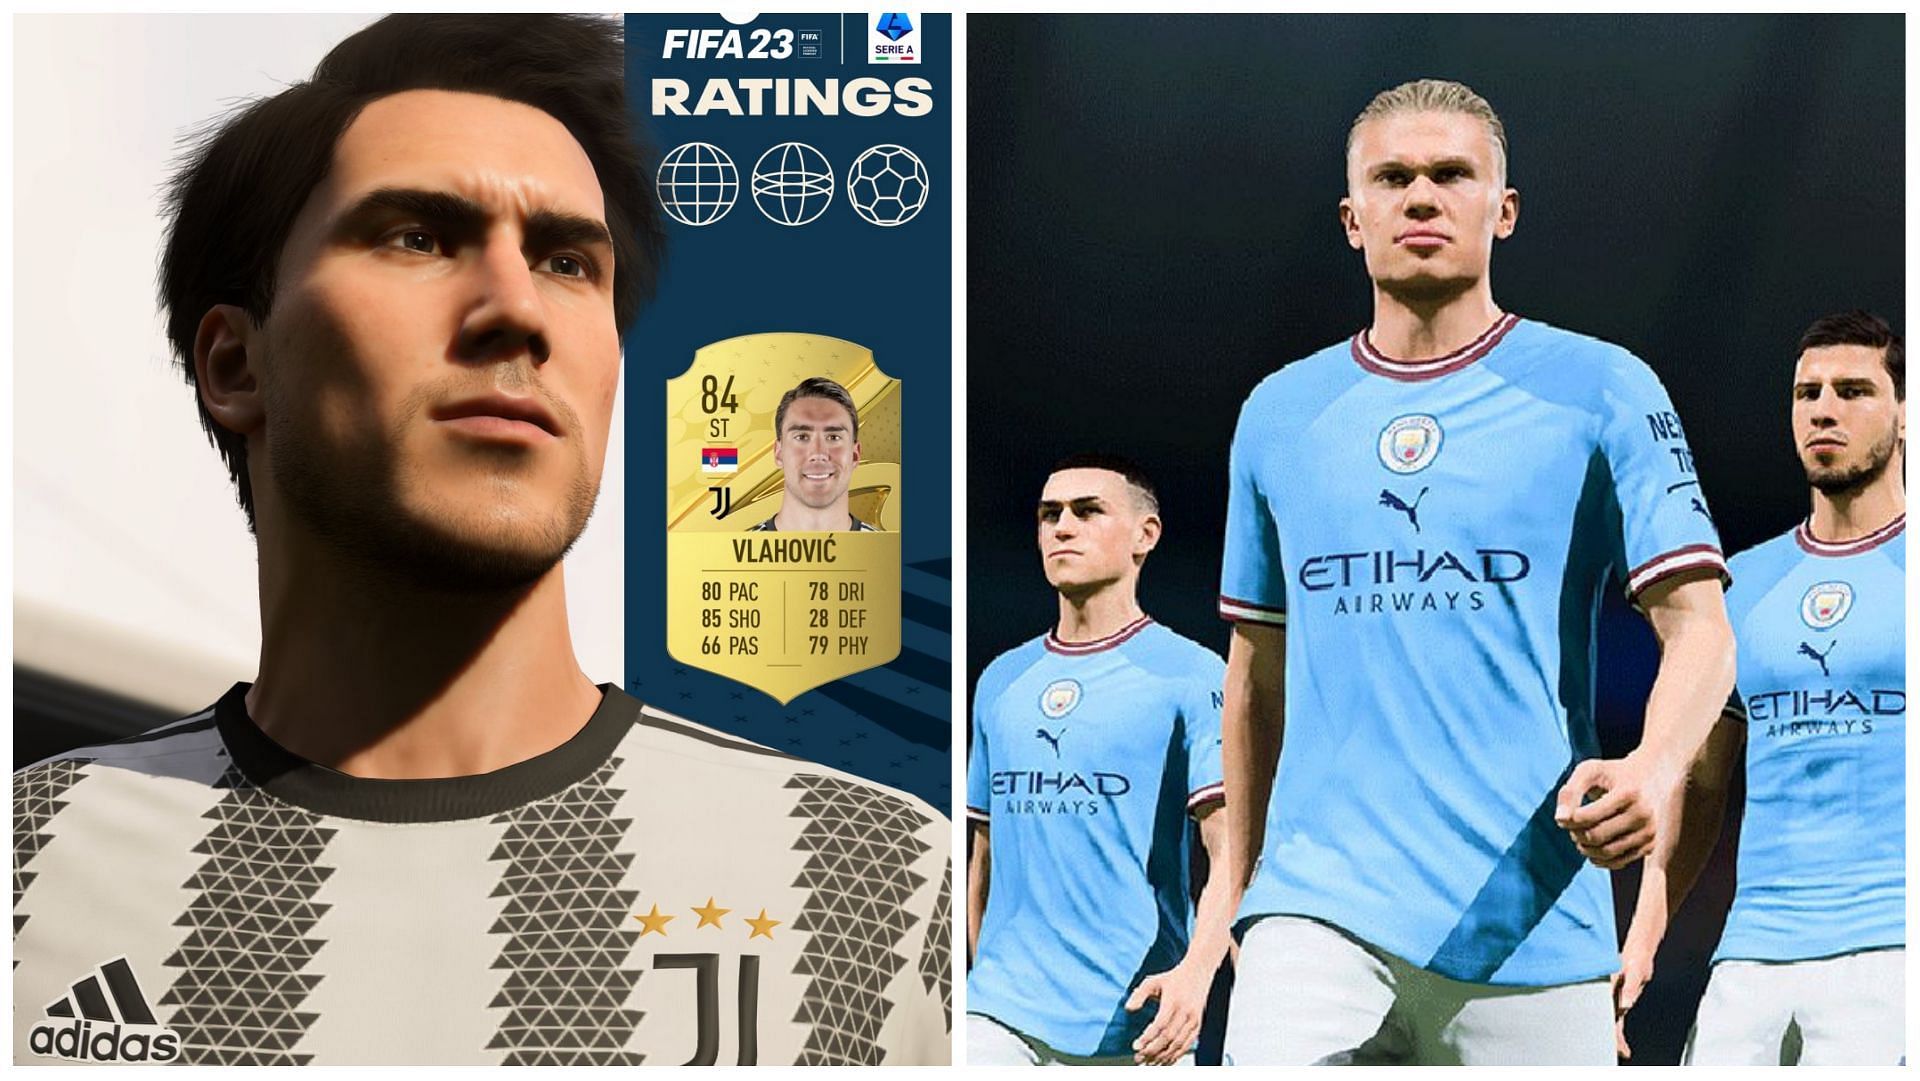 These star strikers captured the imagination of fans around the world last season (Images via EA Sports)